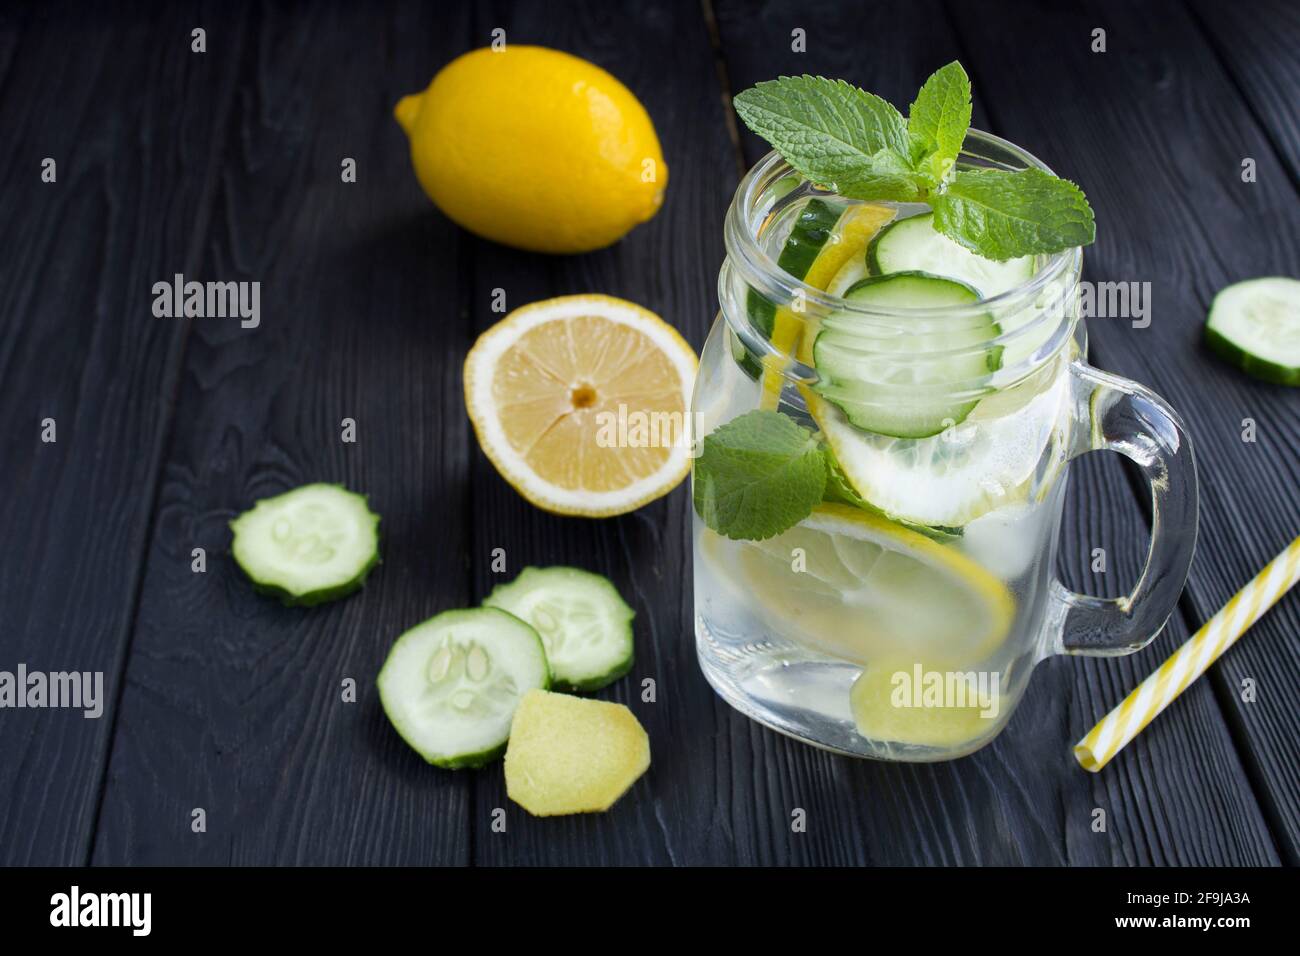 Sassy  water  slimming or infused water with lemon, cucumber and ginger in the glass on the black wooden background.  Copy space. Stock Photo